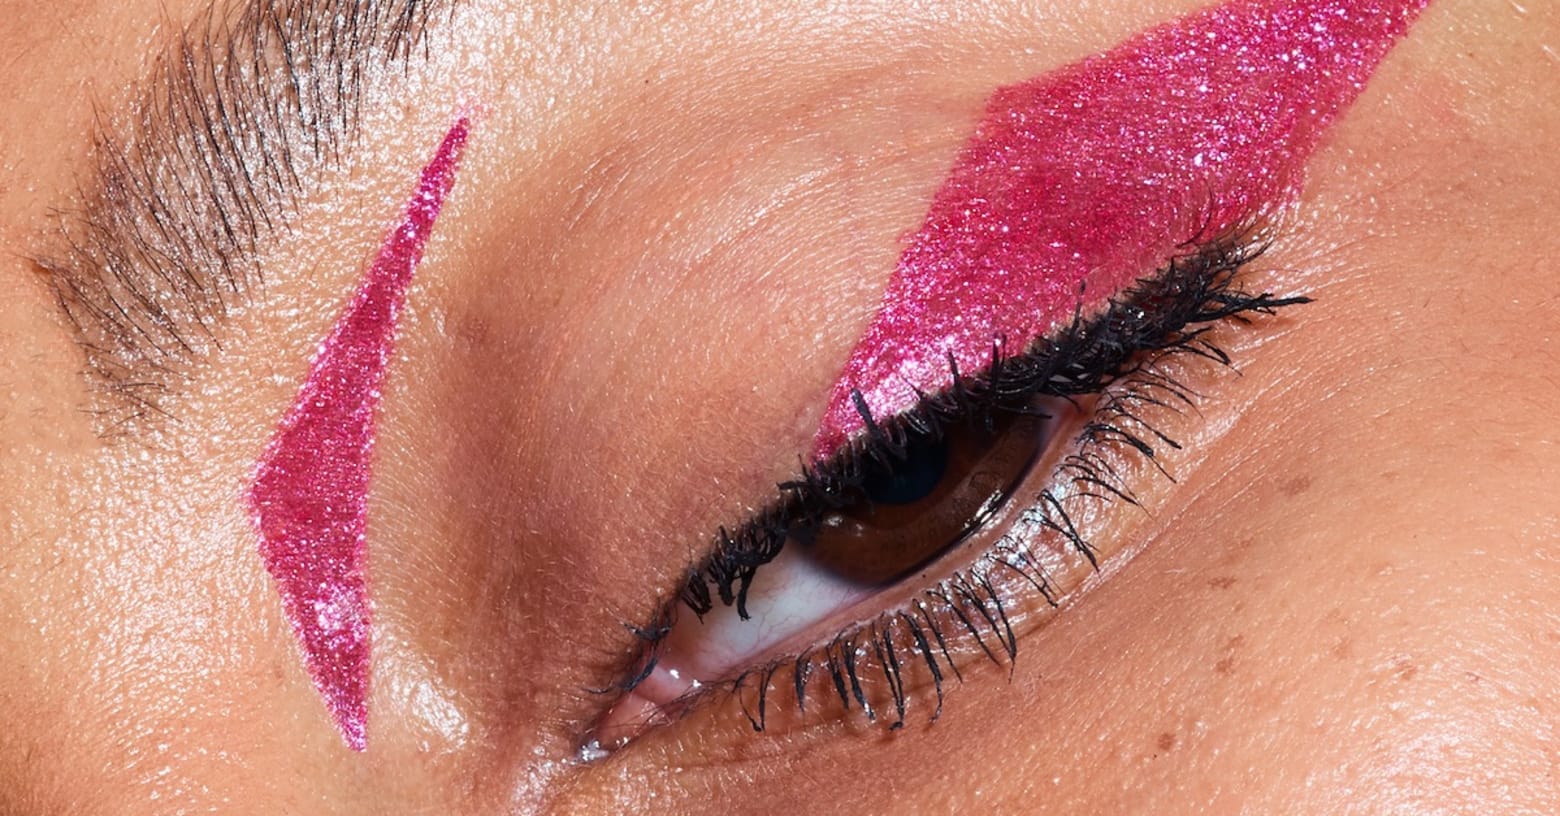 This Graphic Eyeliner Trend Isn't For The Faint Of Heart